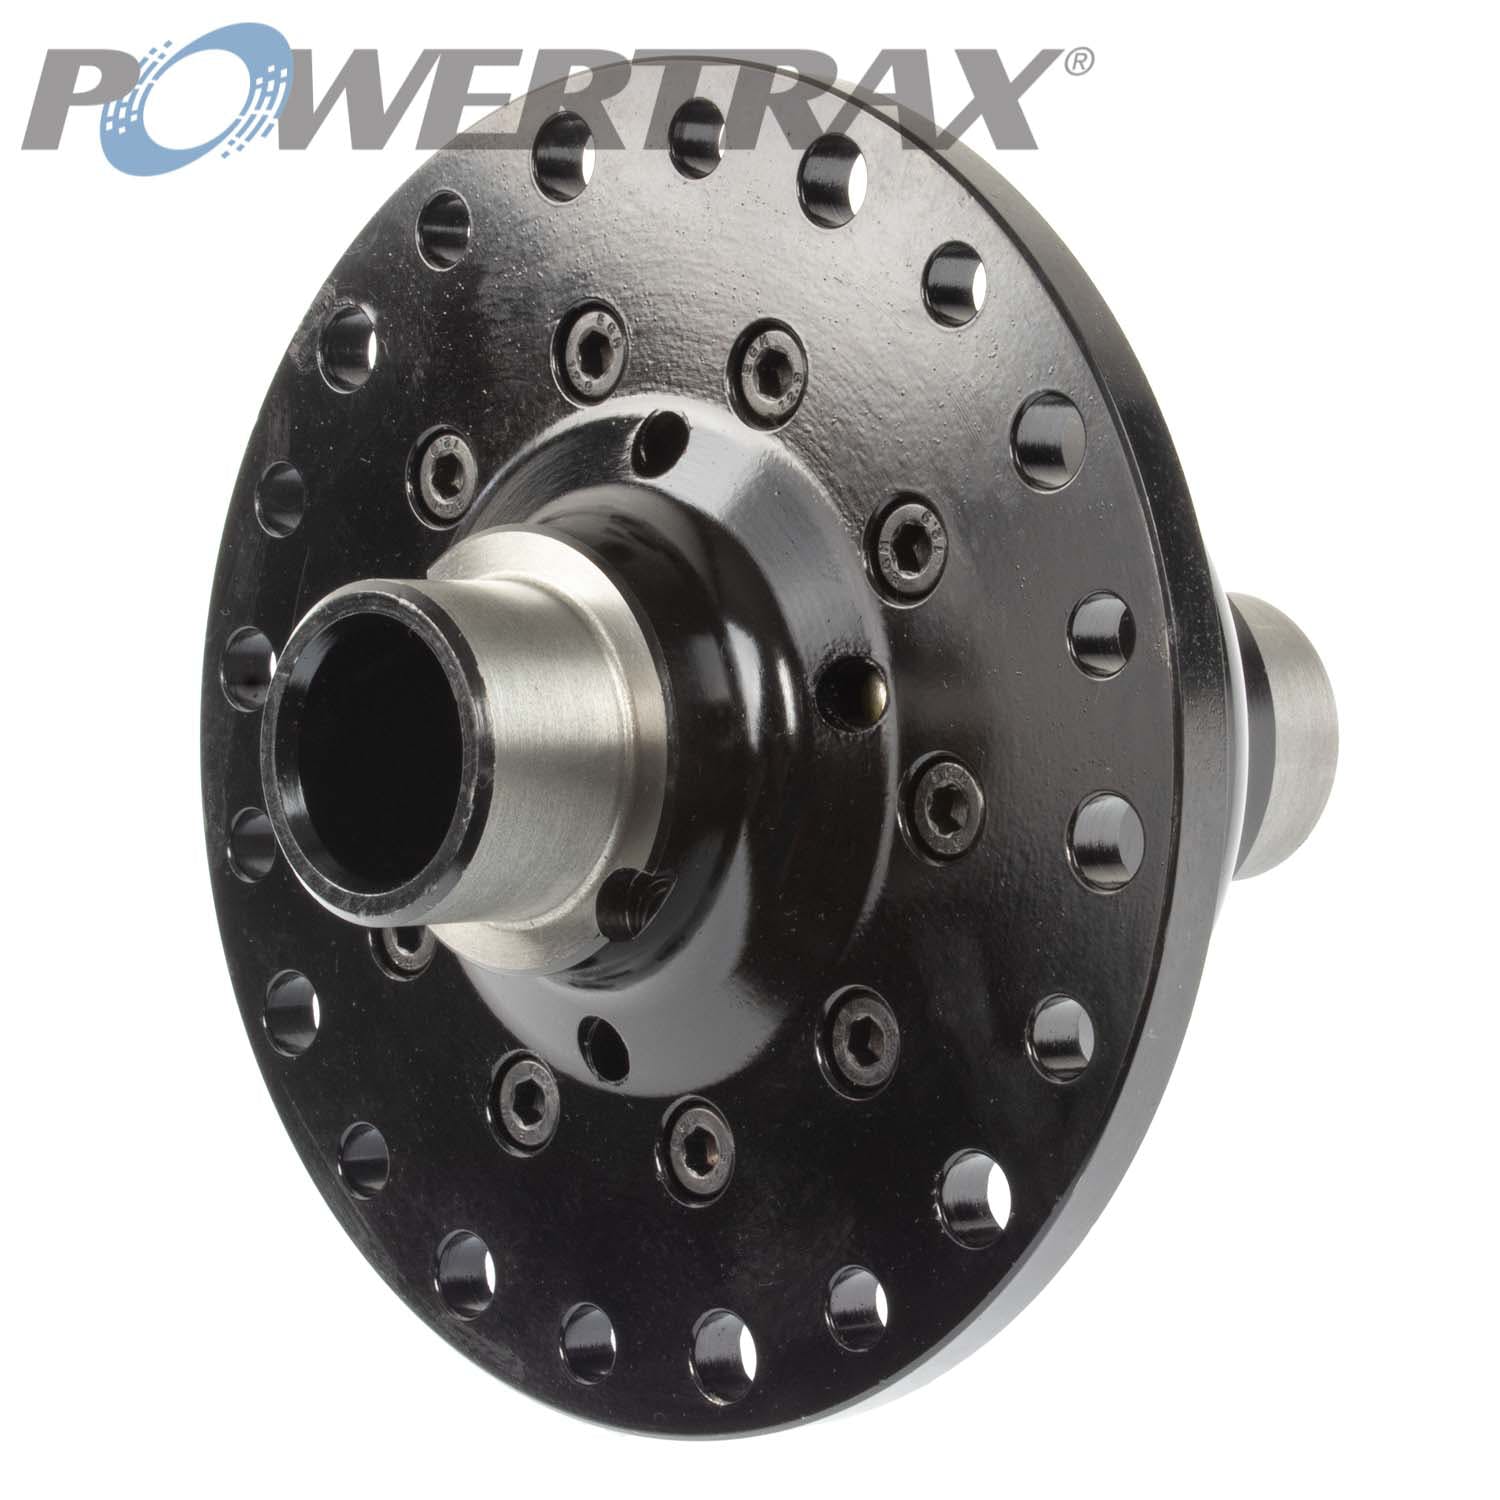 PowerTrax LK444430 Differential Lock Assembly